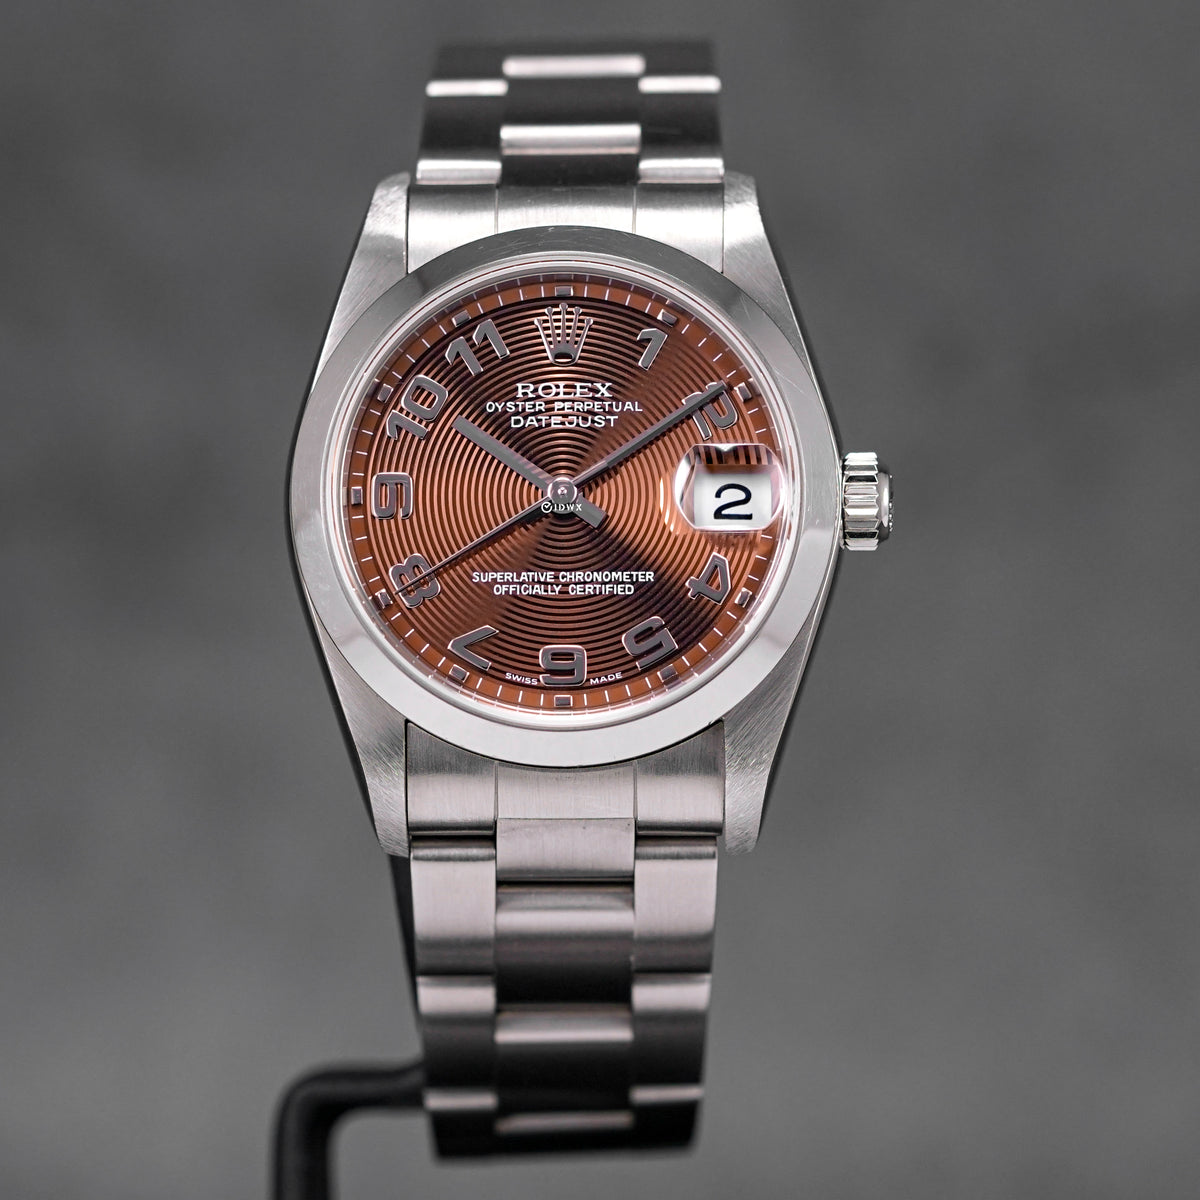 Datejust 31 Concentric